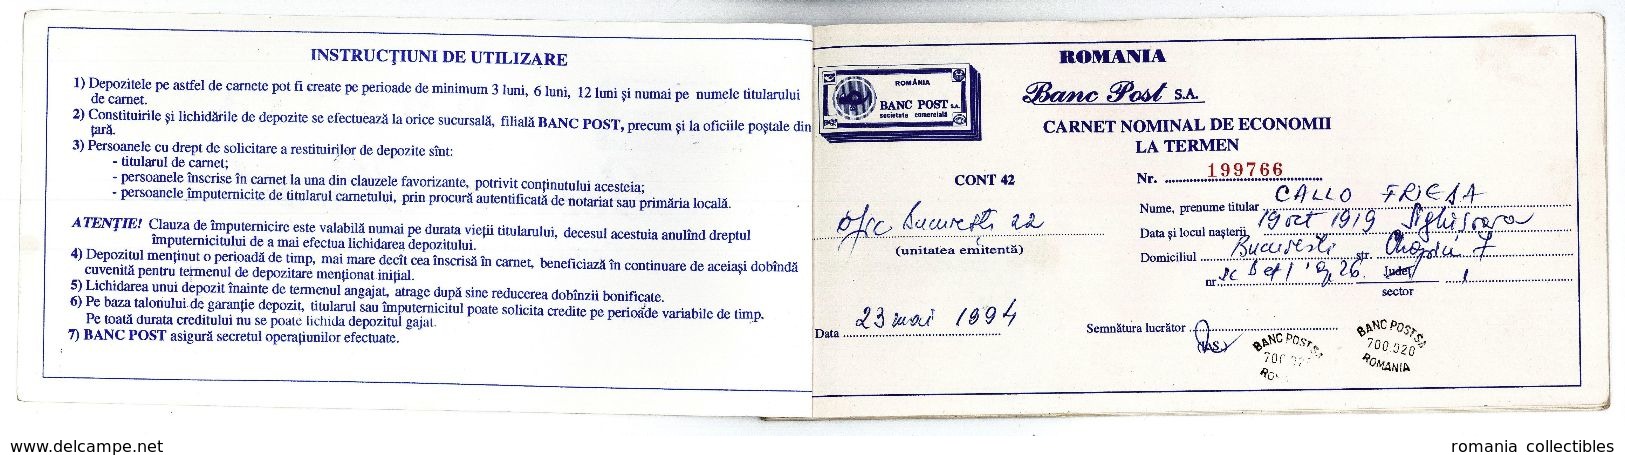 Romania, 1994, Vintage Bank Checkbook / Term Savings Book - Banc Post - Cheques & Traveler's Cheques